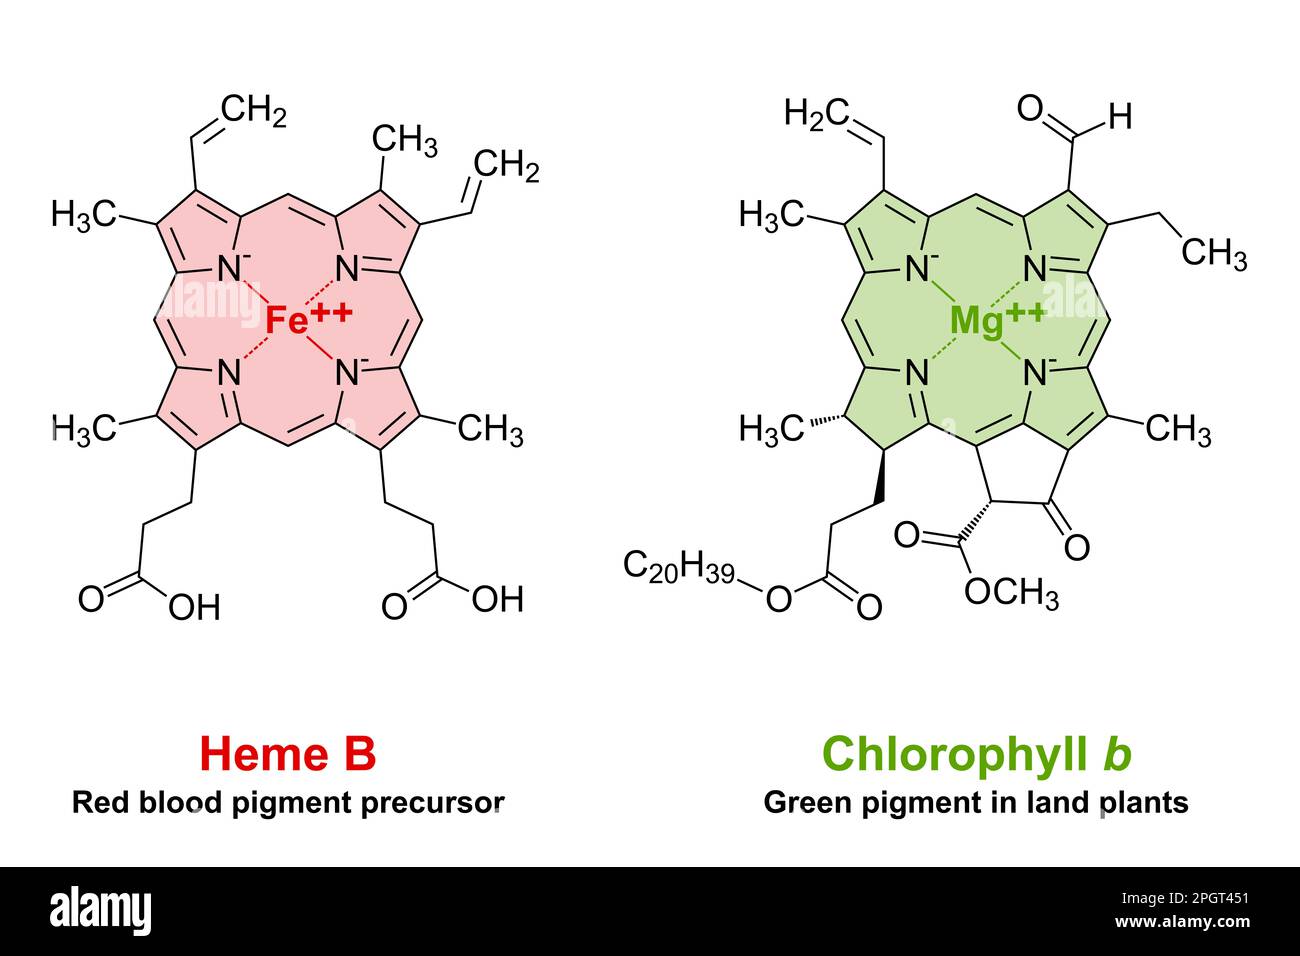 Heme and chlorophyll similarities in chemical structure. A plane porphyrin ring with 4 nitrogen atoms, binding an iron or magnesium atom. Stock Photo